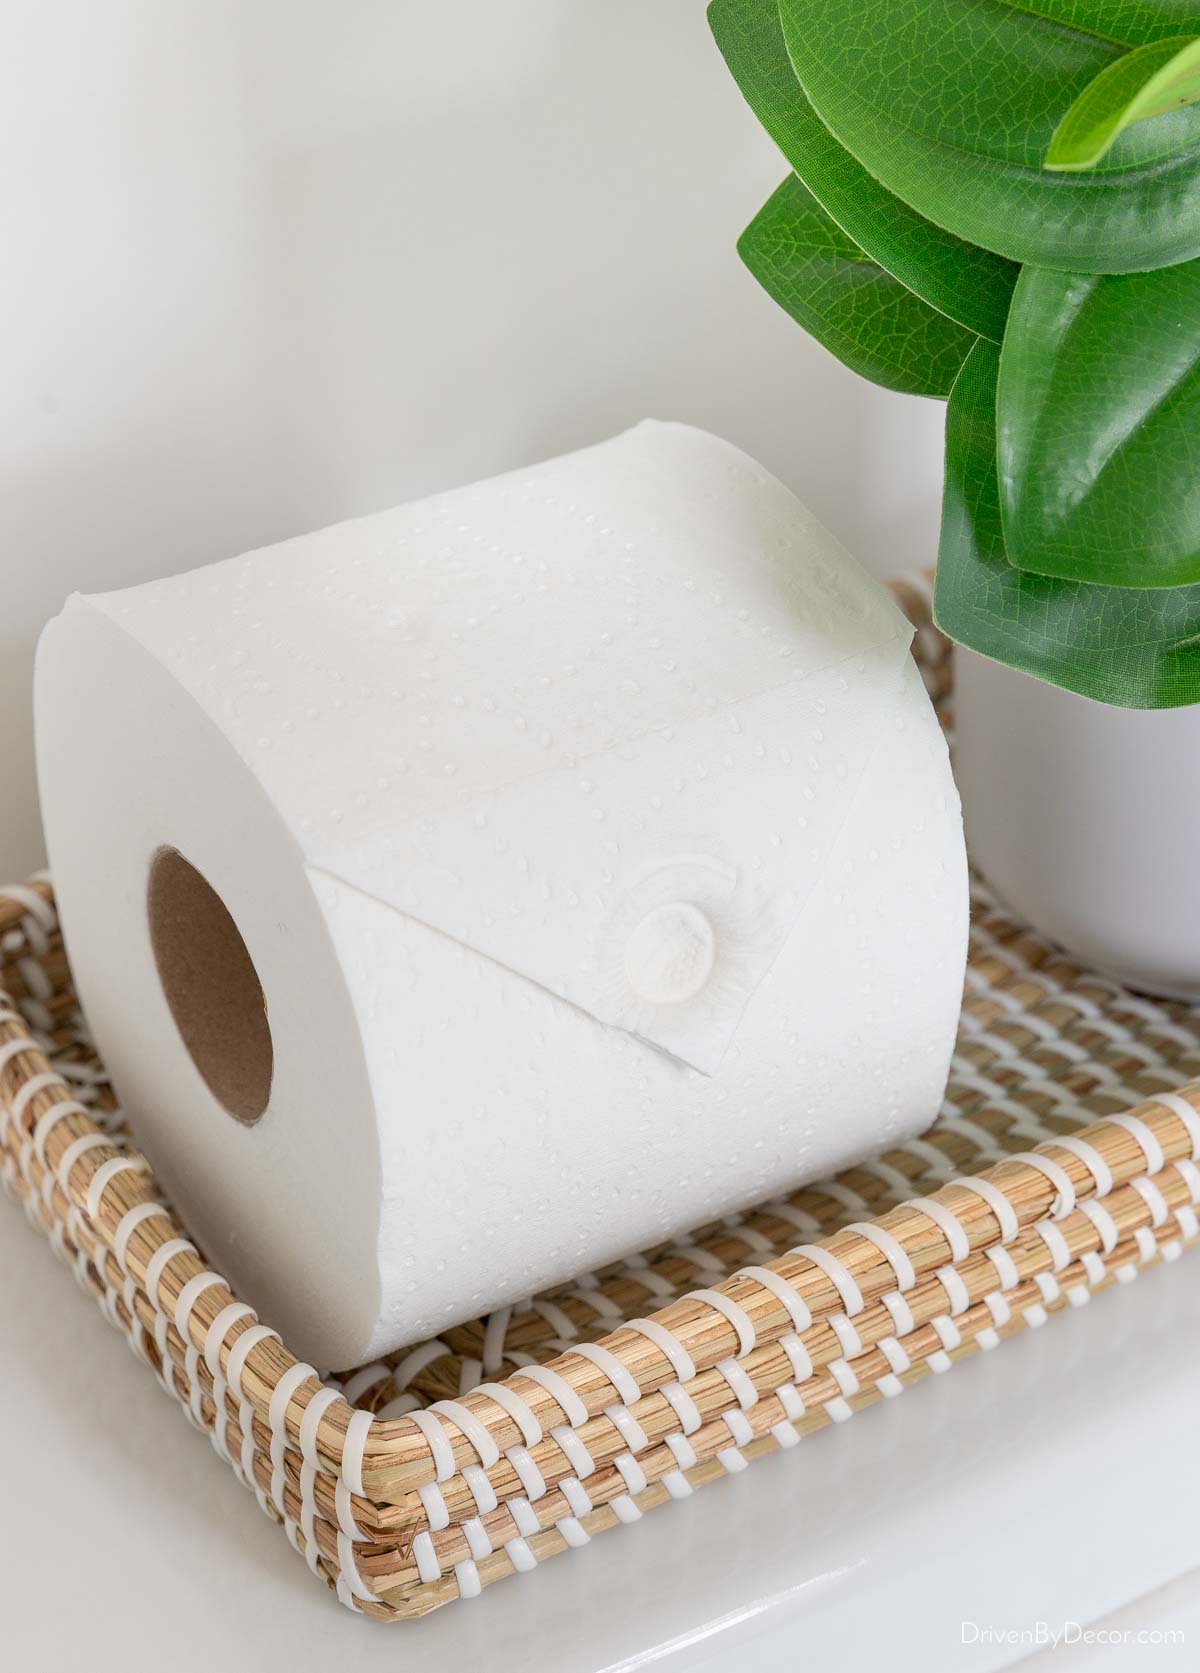 Sealed end of toilet paper roll